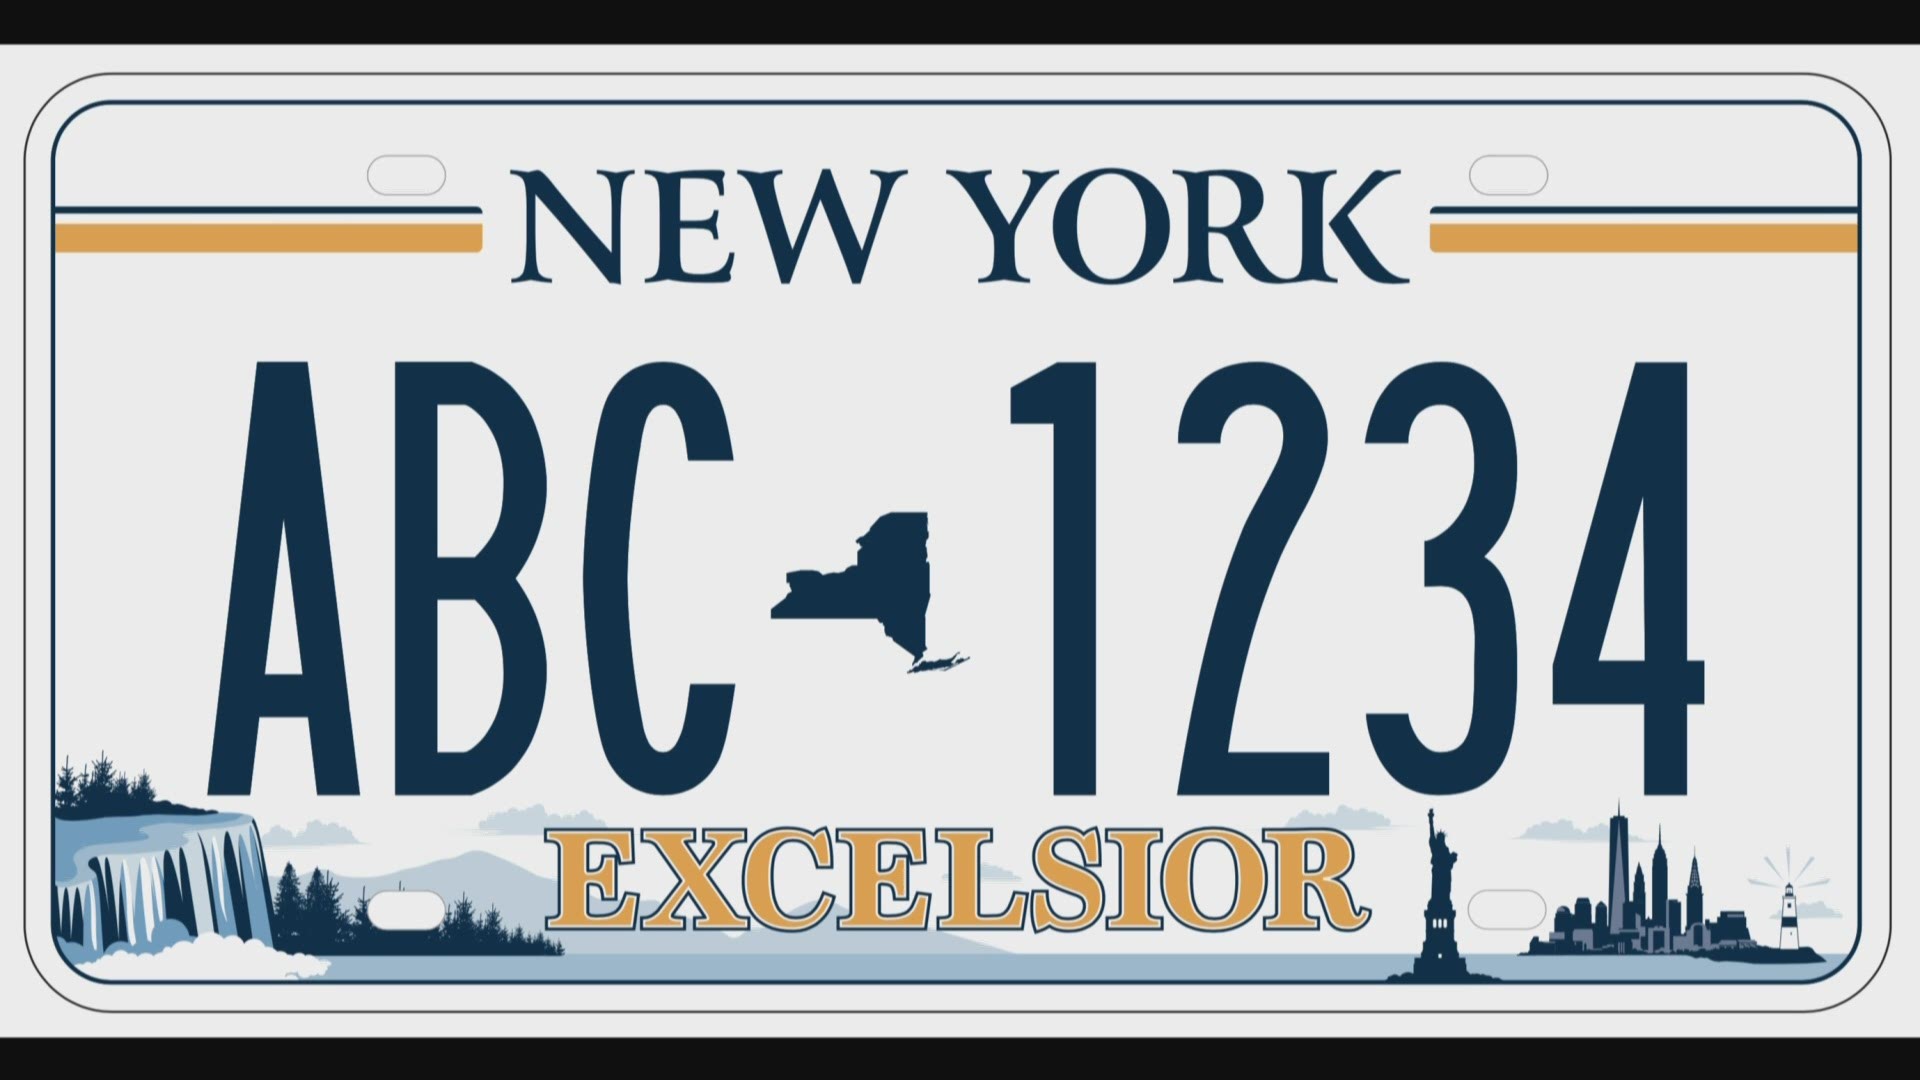 New NY plates available in Wyoming County